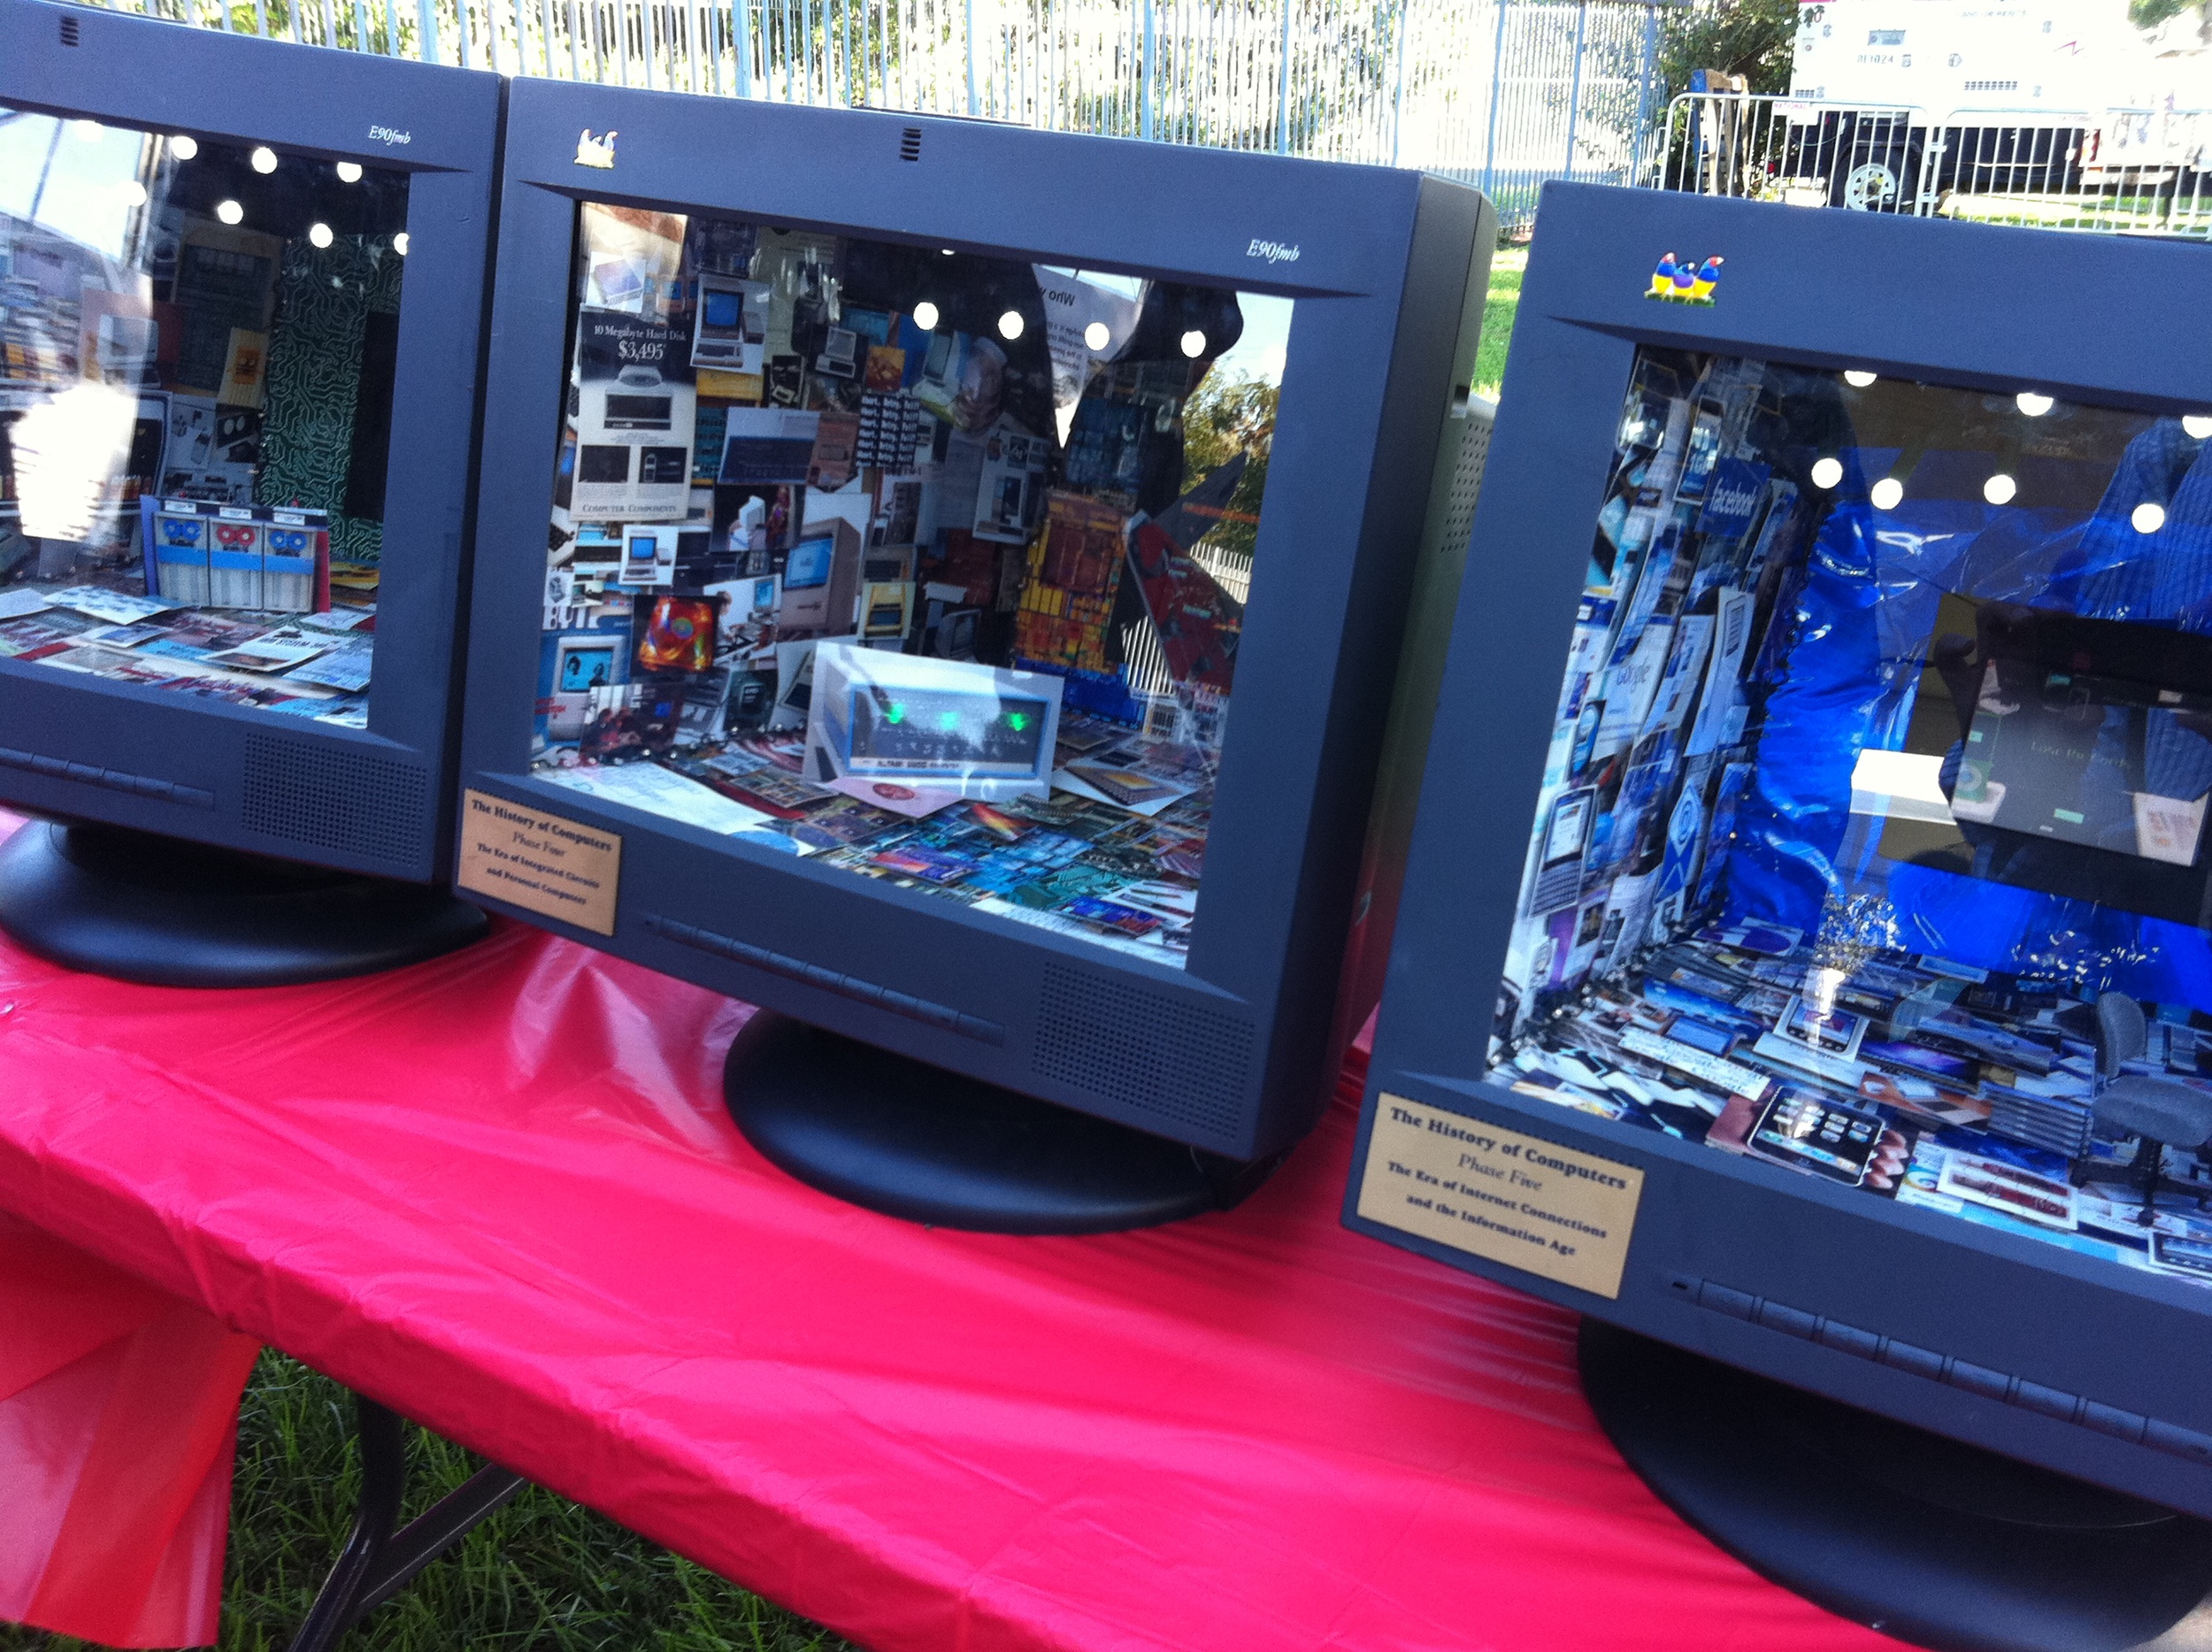 I went to Maker Faire. It's one part technology trade show and one part carnival sideshow.